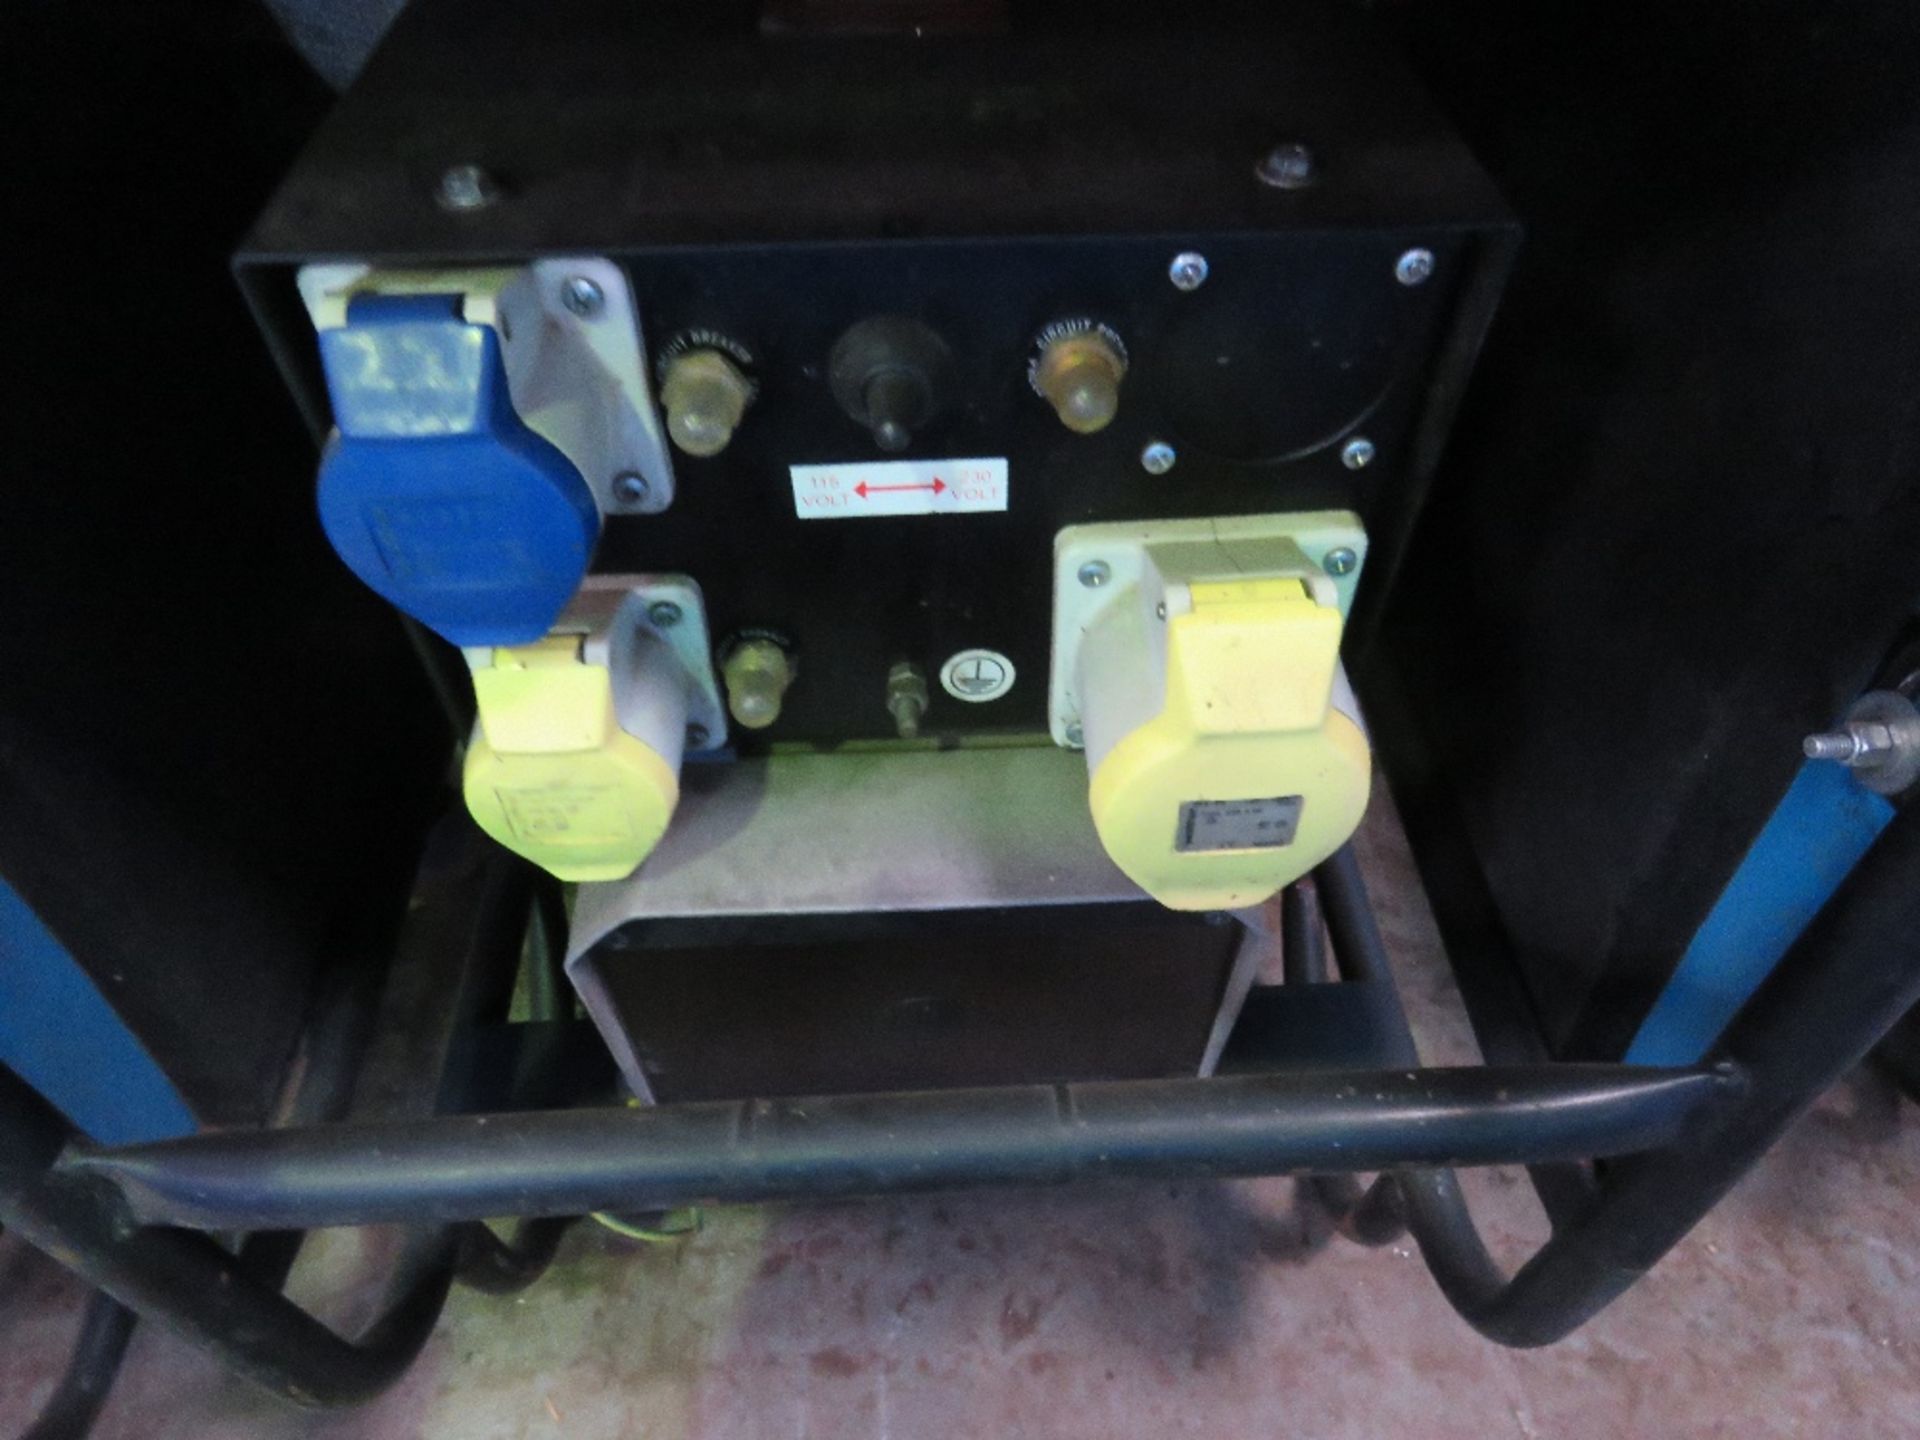 STEPHILL 4KVA DIESEL ENGINED GENERATOR. WHEN TESTED WAS SEEN TO RUN AND MAKE POWER. DIRECT FROM LOCA - Image 2 of 3